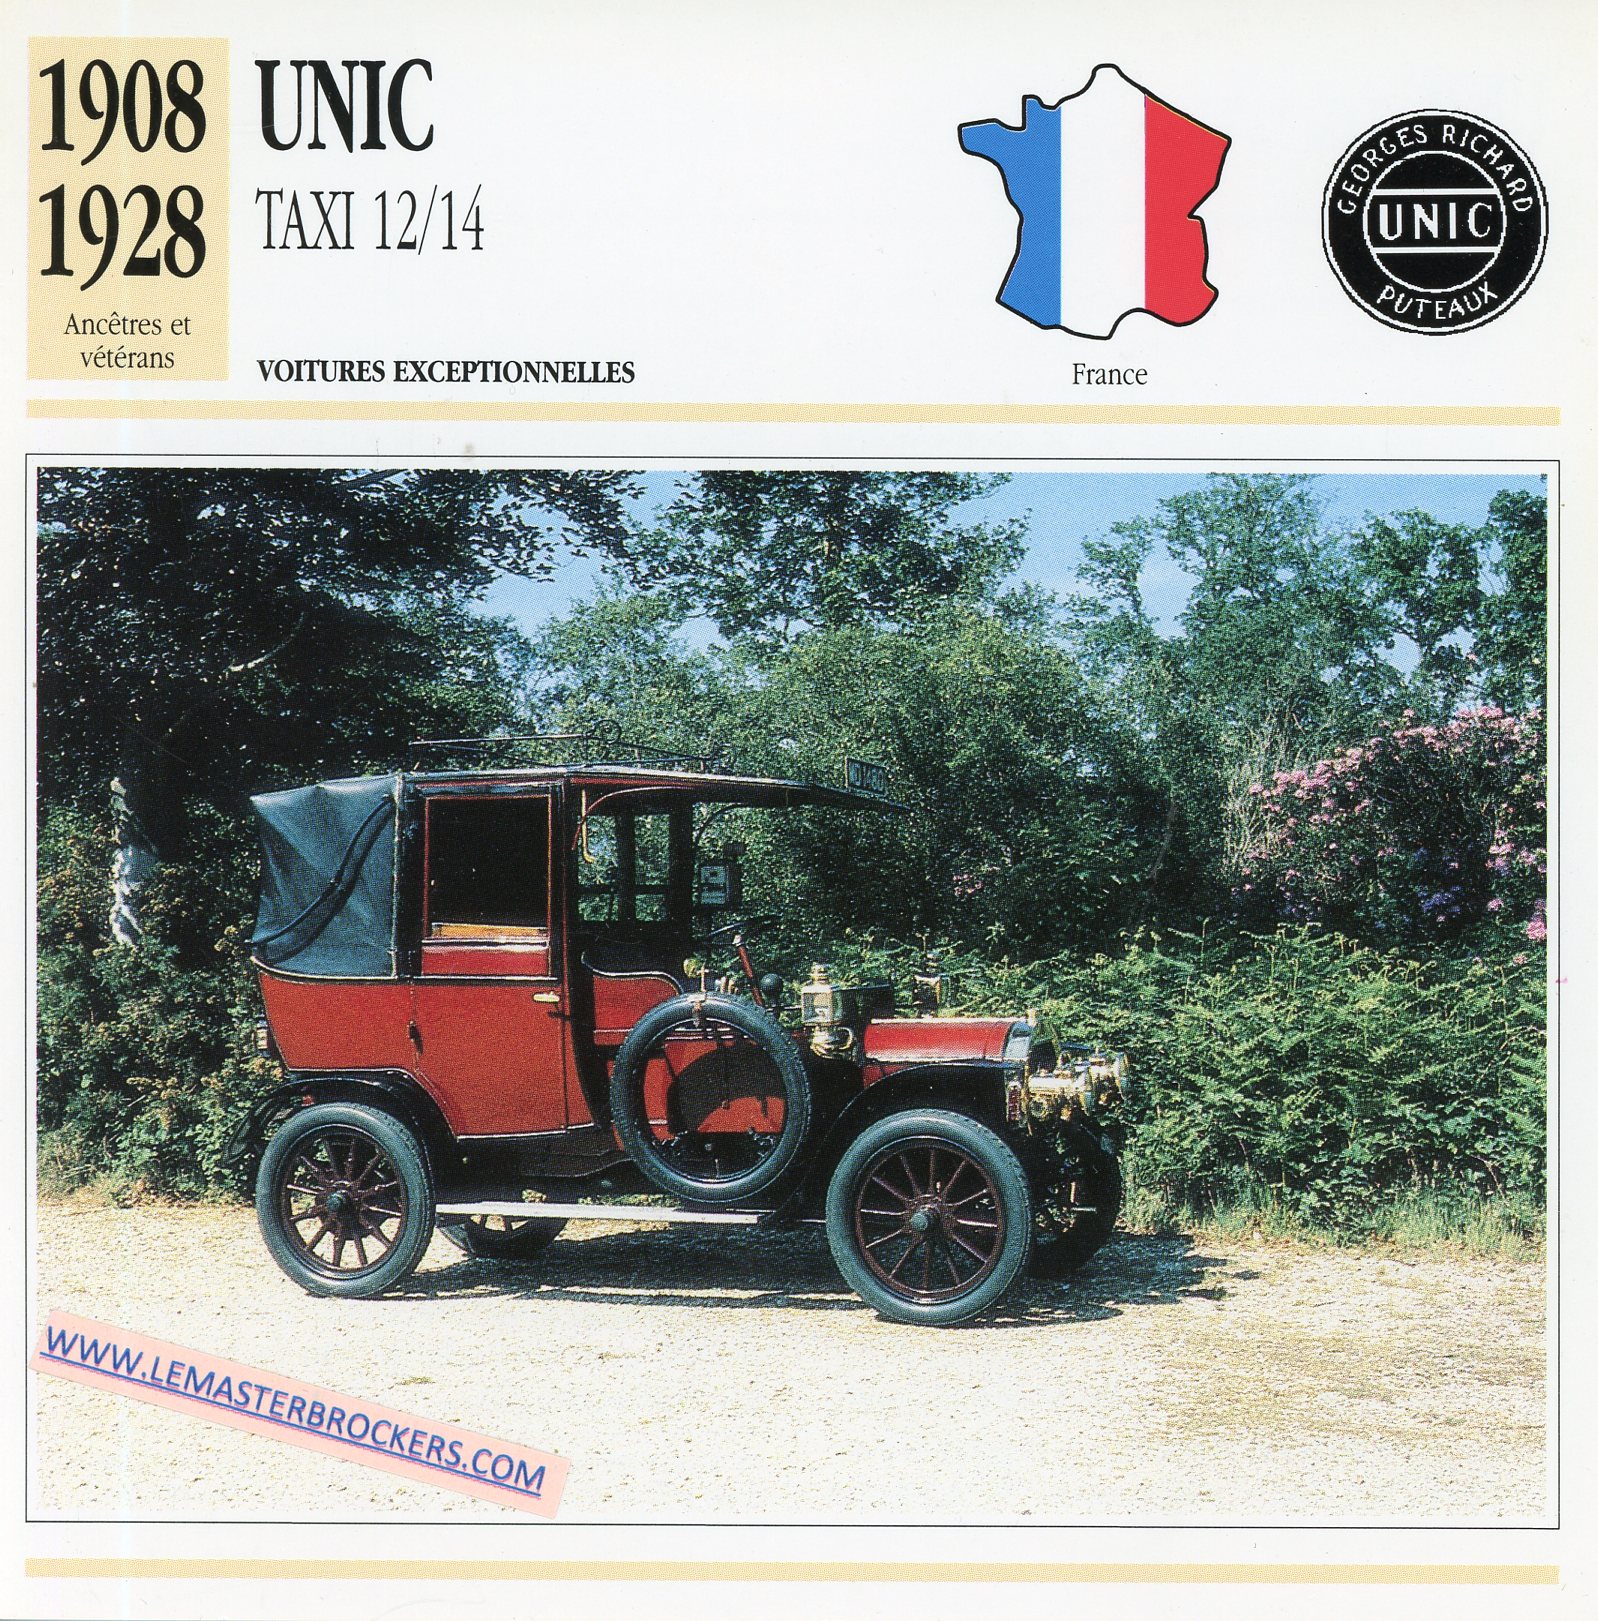 FICHE-AUTO-UNIC-TAXI-12-14-1908-1928-LEMASTERBROCKERS